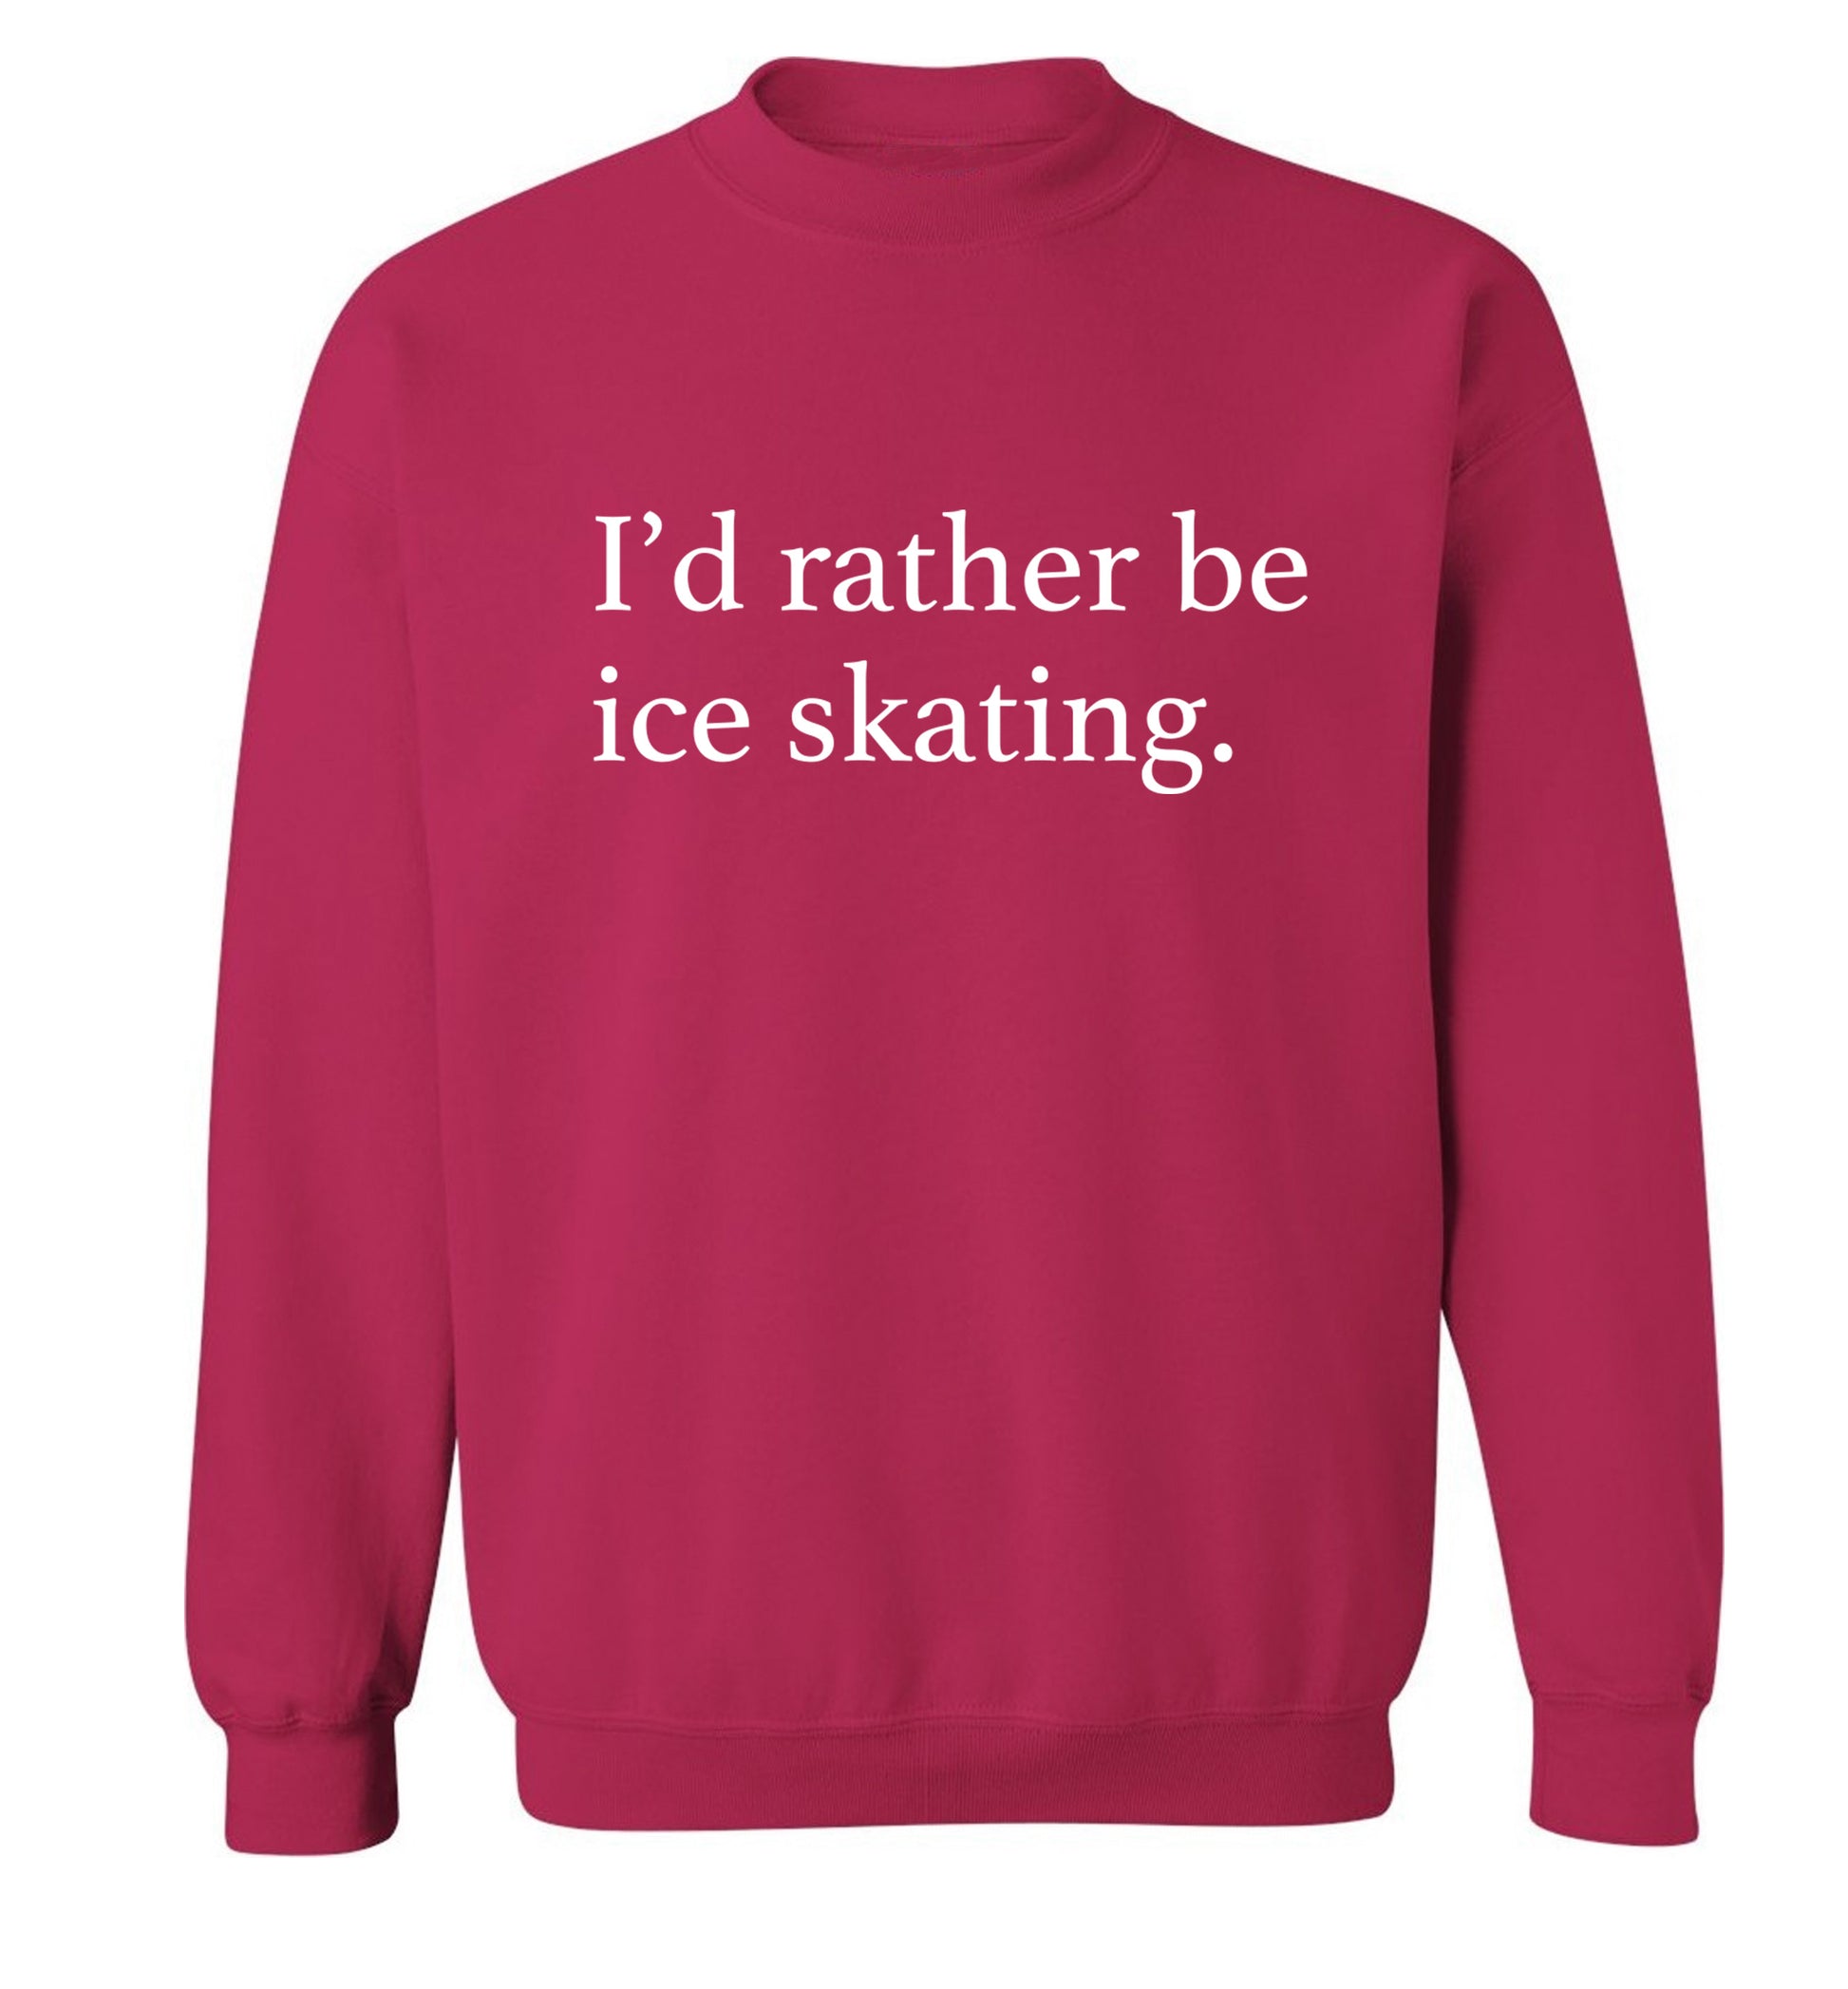 I'd rather be ice skating Adult's unisexpink Sweater 2XL